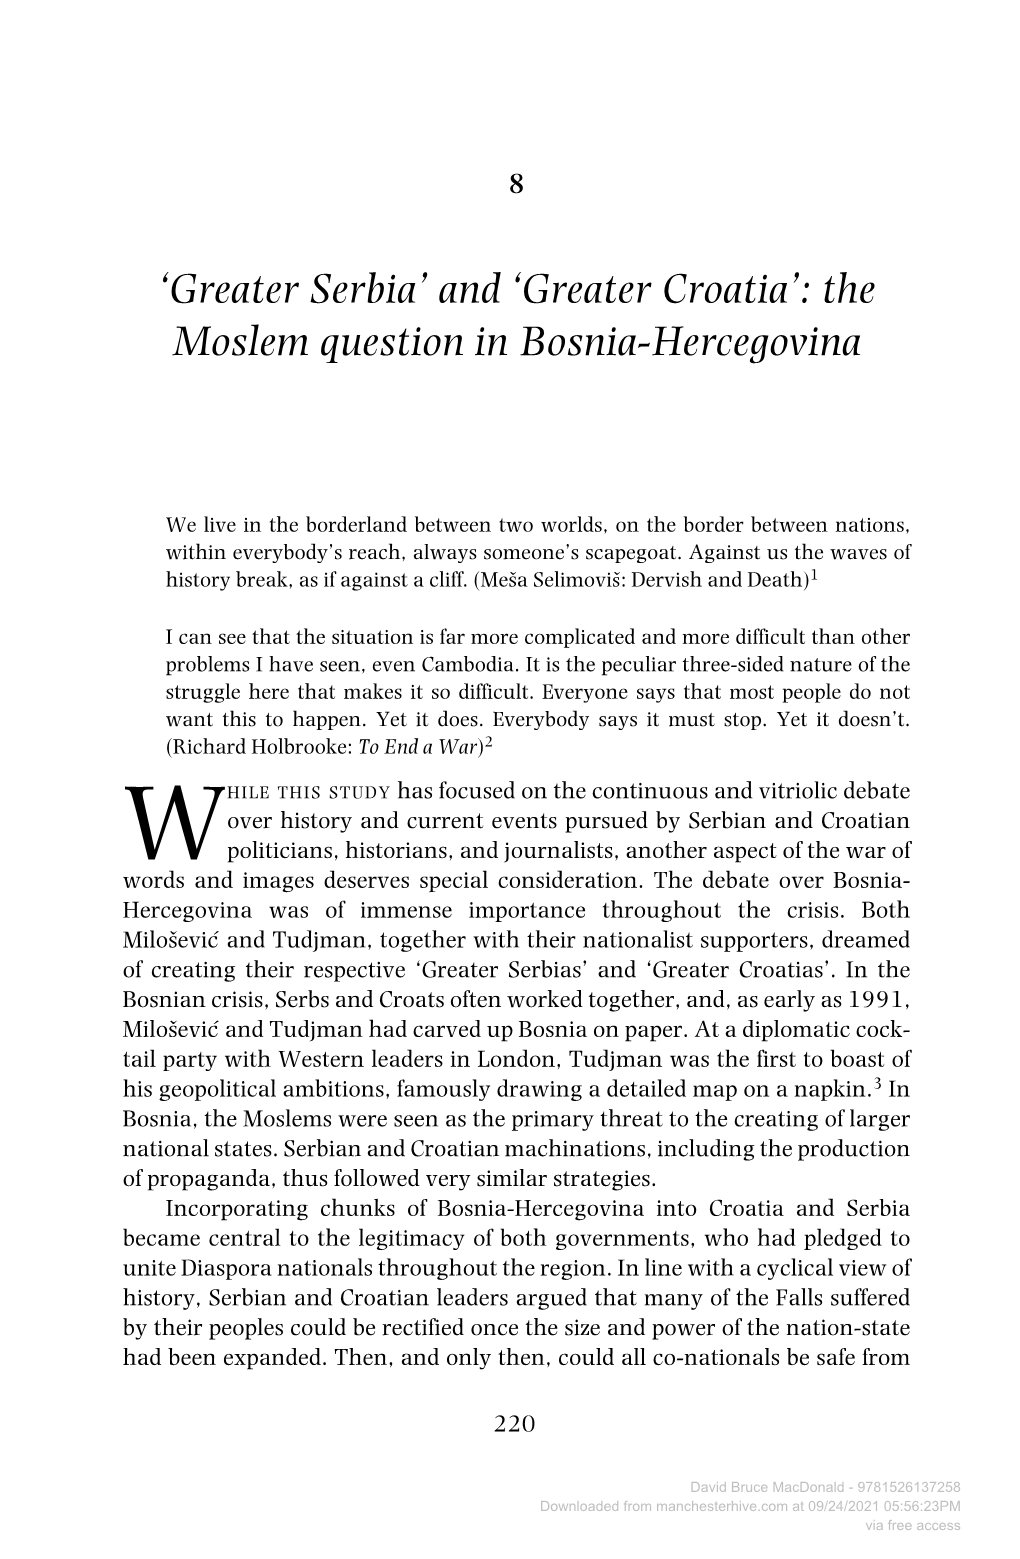 'Greater Serbia' and 'Greater Croatia': the Moslem Question In